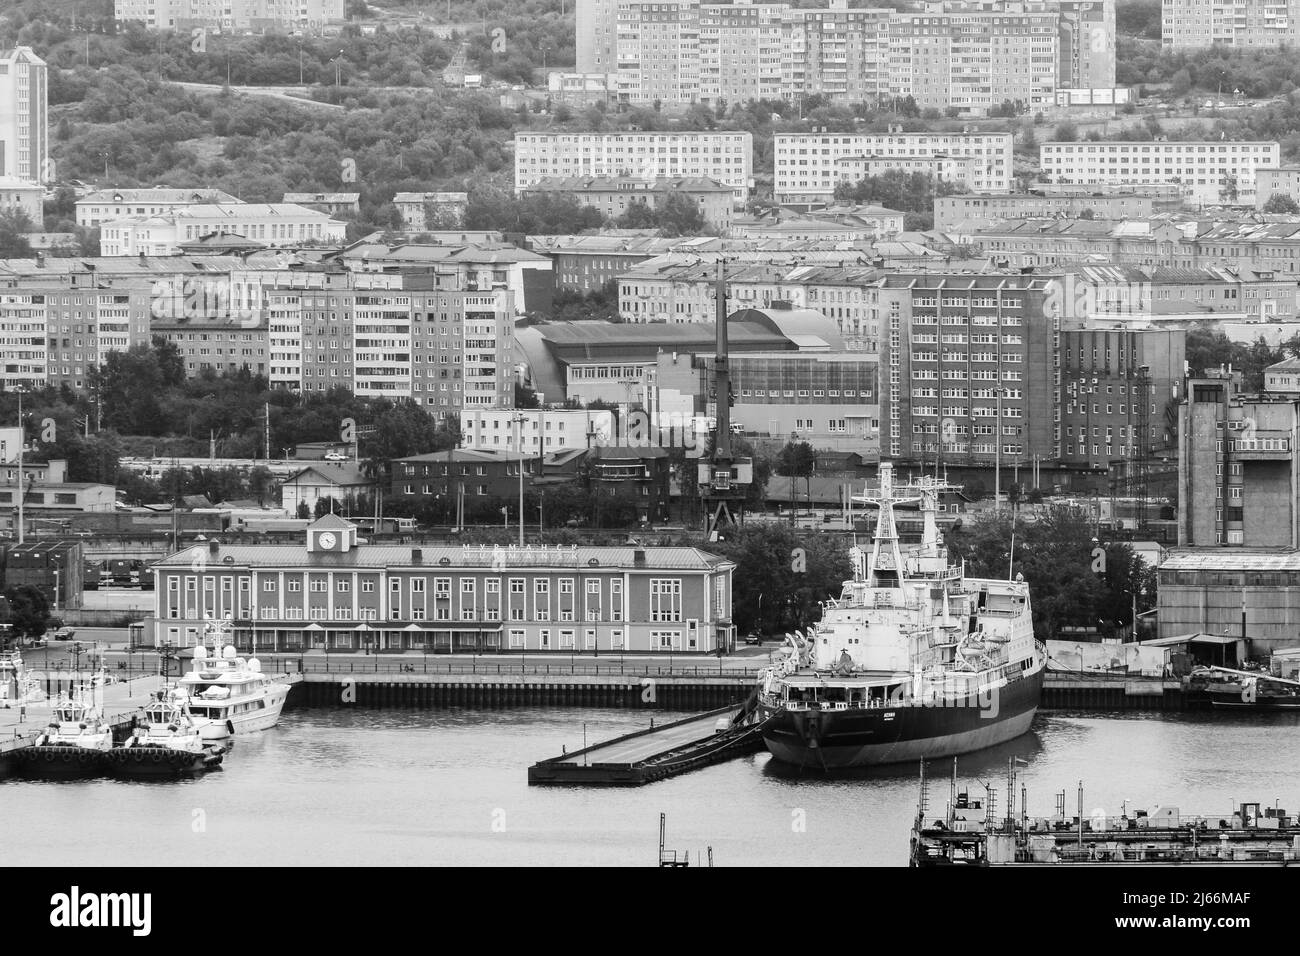 Murmansk, Russia - July 24, 2017: The first nuclear icebreaker Lenin moored at the pier in Murmansk Stock Photo